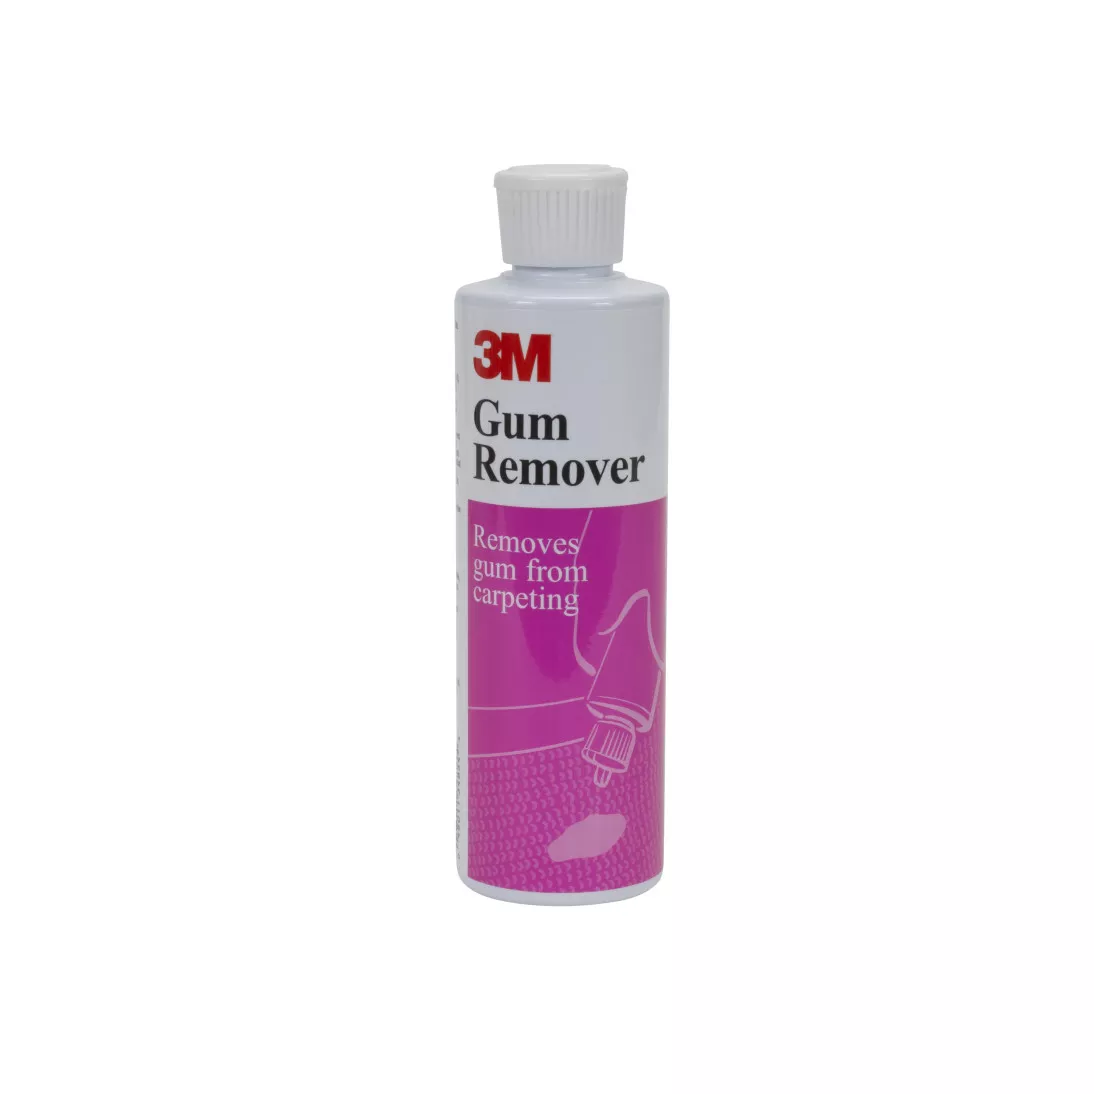 3M™ Gum Remover Ready-to-Use, 8 Oz, 6/Case